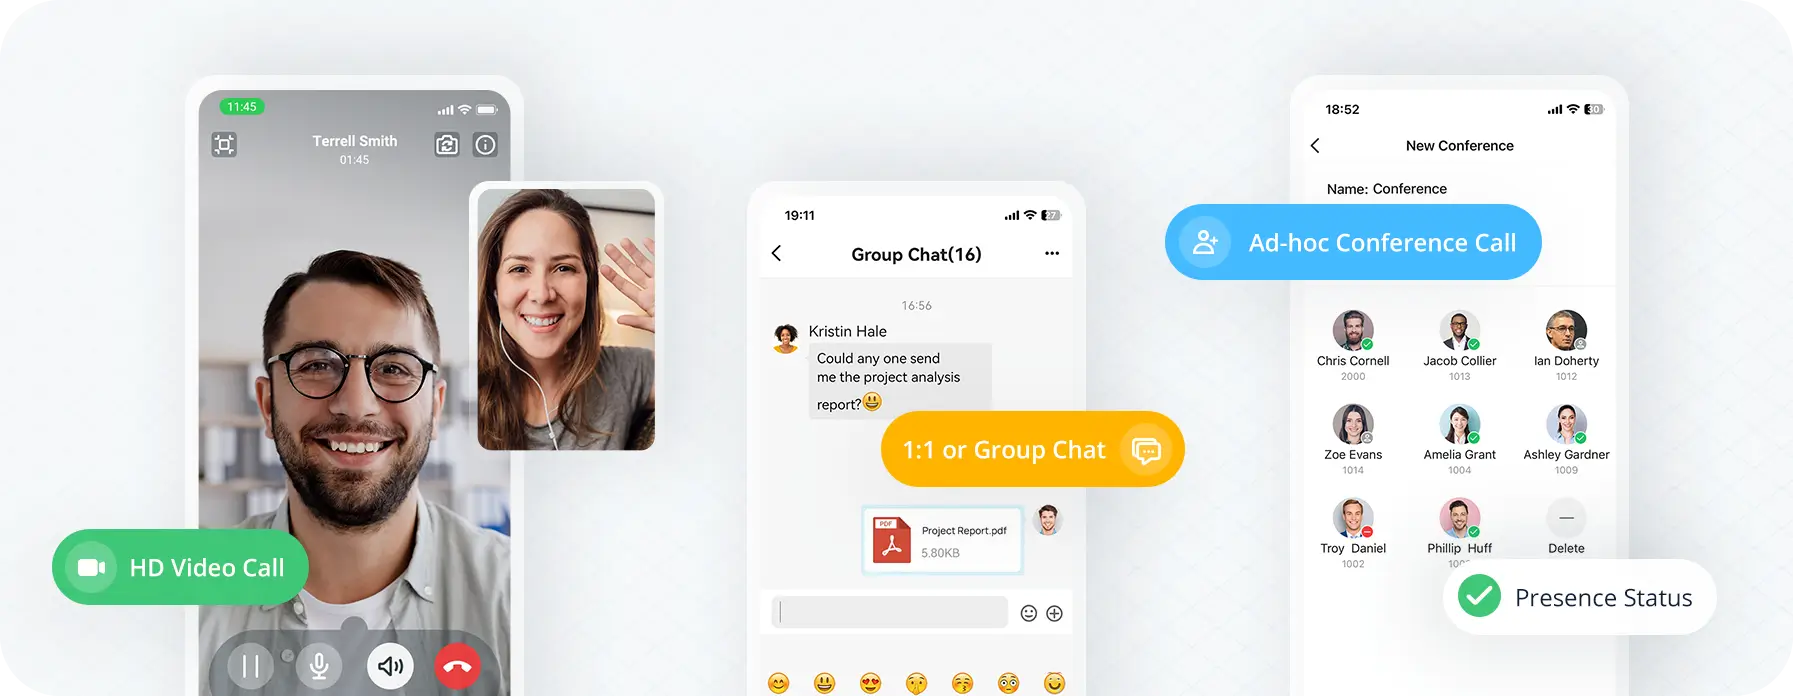 HD Video Calls; 1:1 or Group Chat; Audio Conferencing Supporting Up to 8 Pariticipant; Real-time Extension Presense Status;